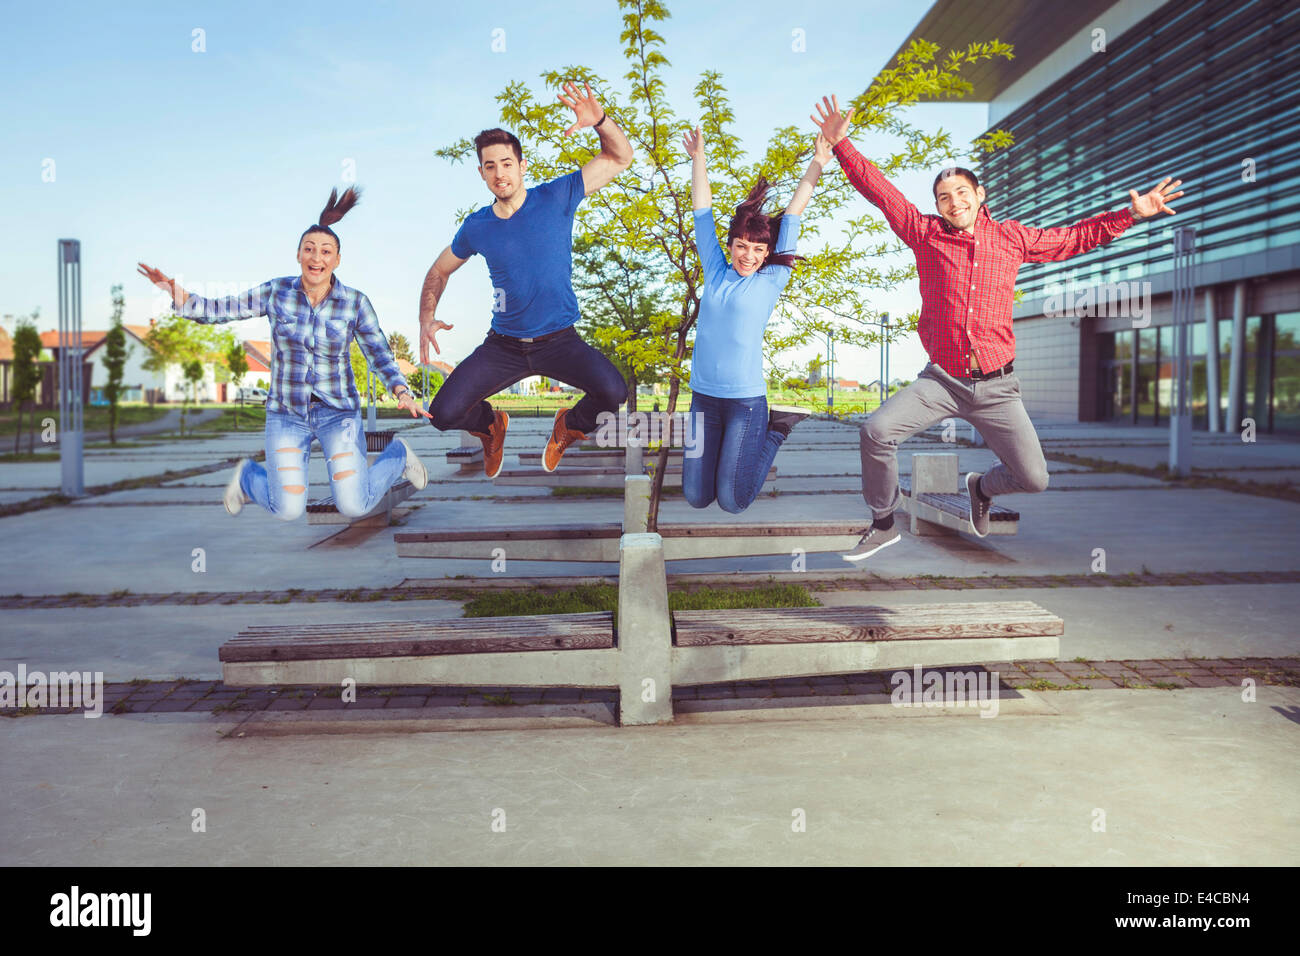 Friends jumping arms outstretched, Osijek, Croatia Stock Photo